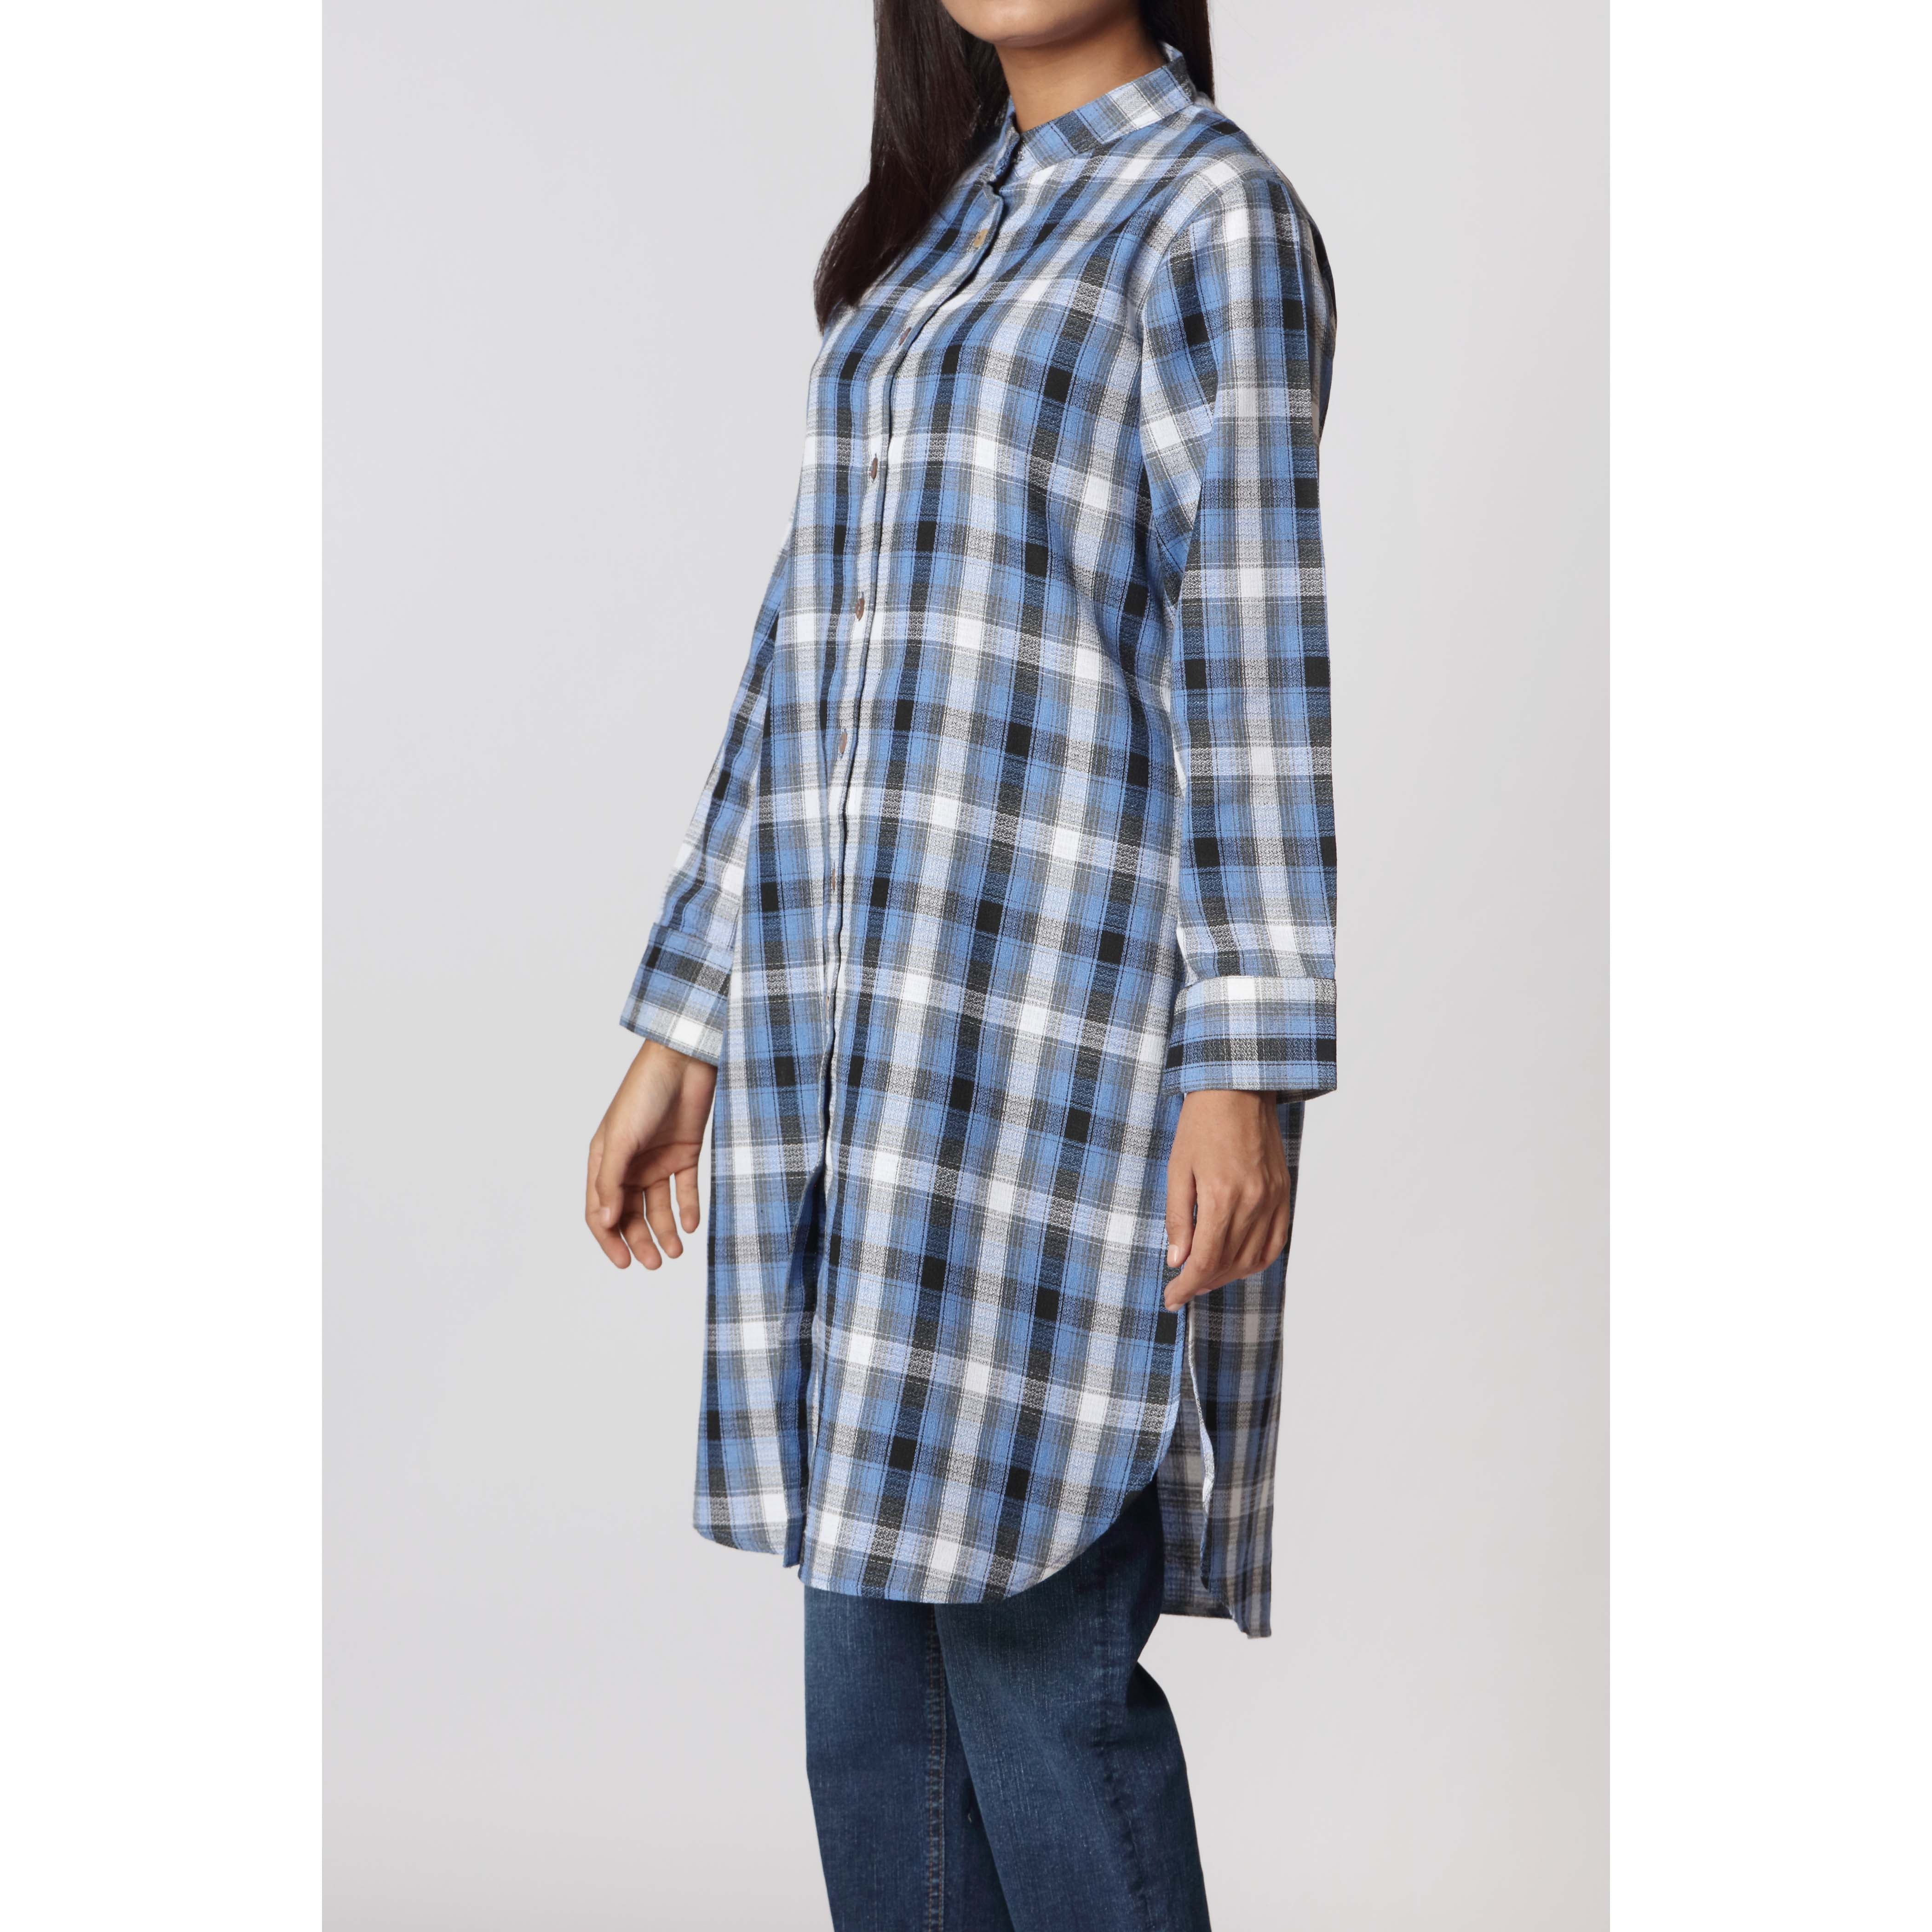 1PC- Flannel Checkered Shirt  PW2263